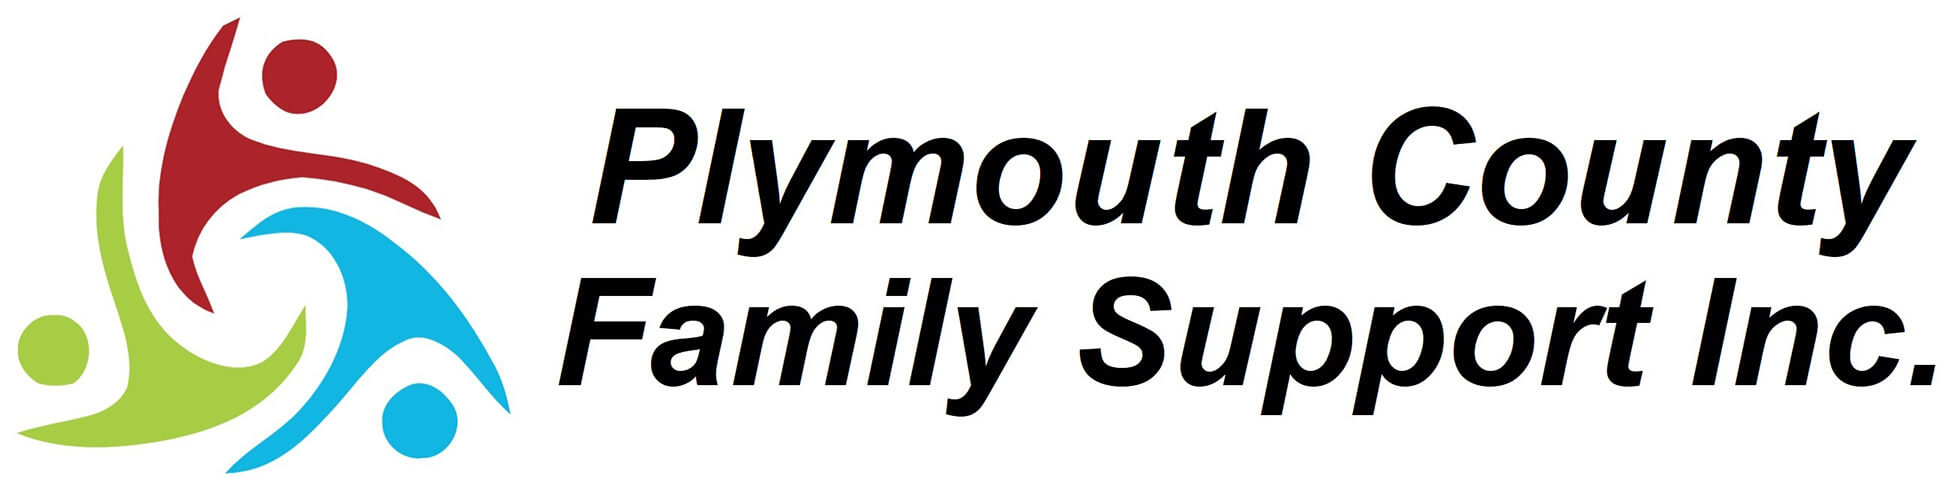 plymouth-county-family-support-logo